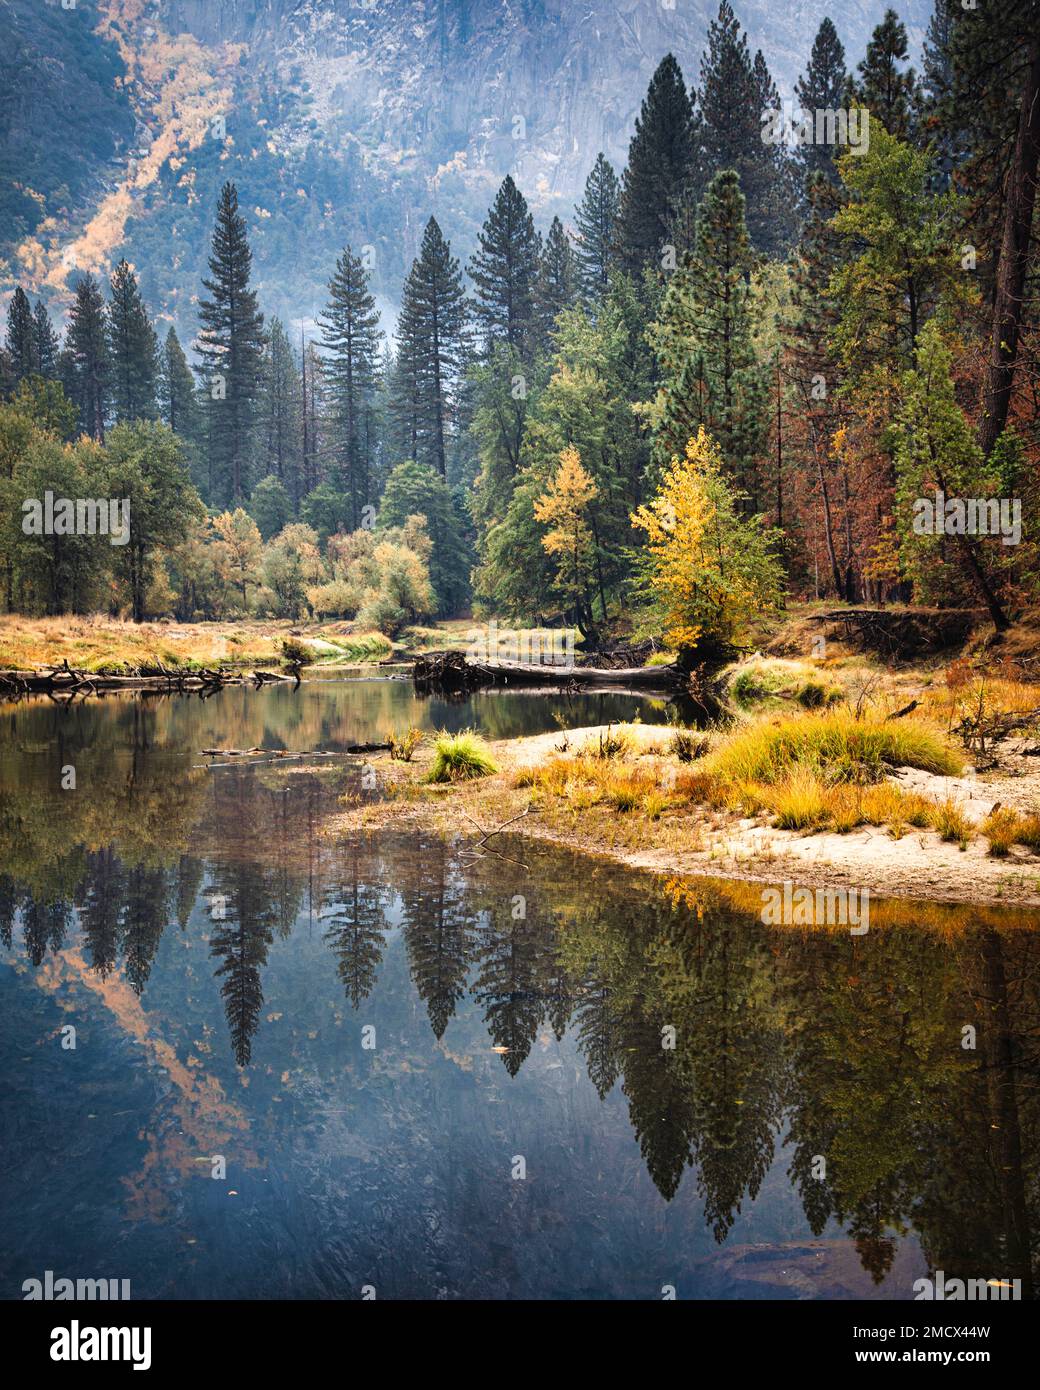 The Merced River flows through Yosemite Valley in the late fall. Yosemite National Park, California. Stock Photo